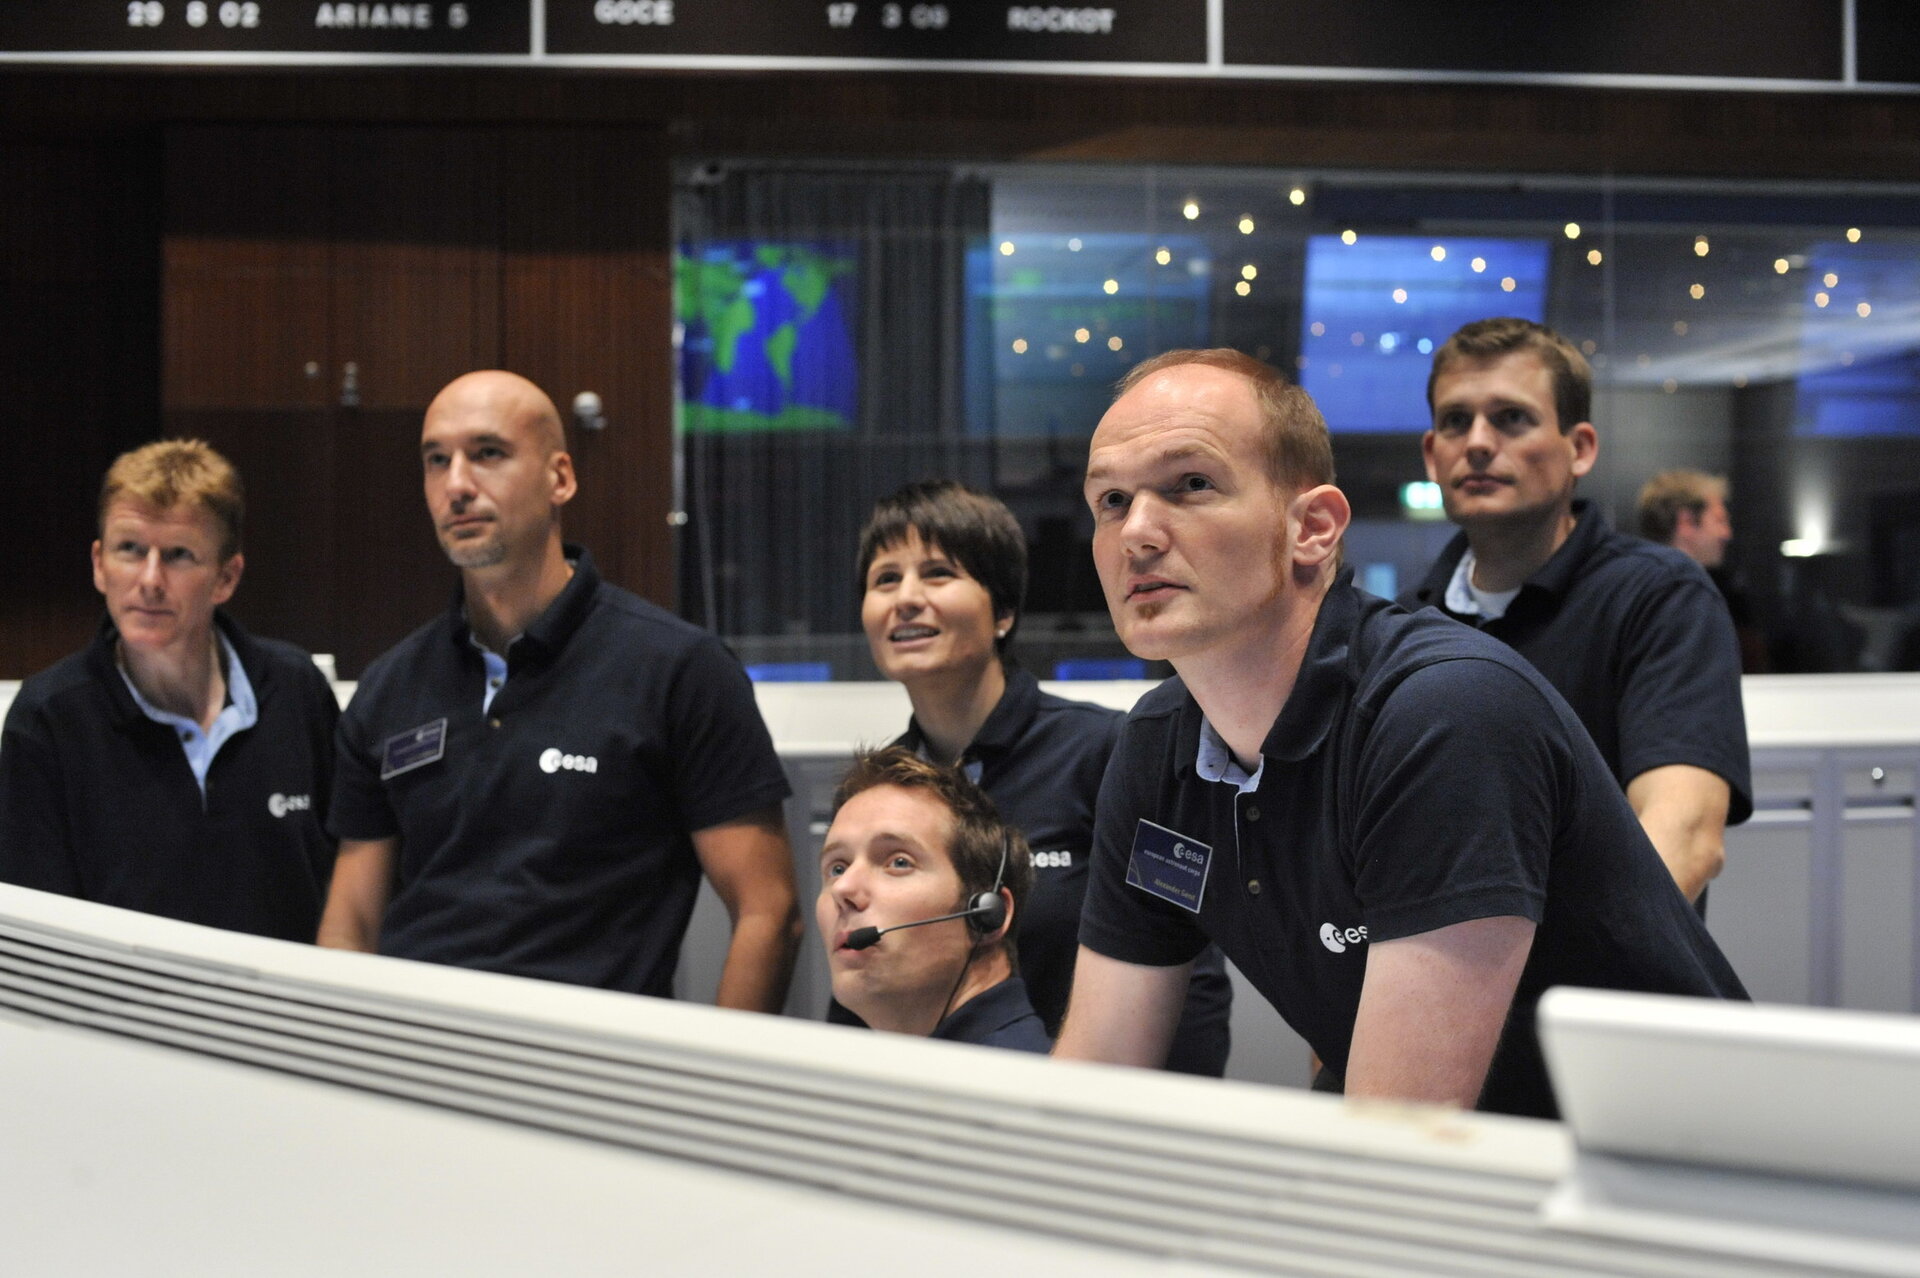 ESA astronauts take part in simulation familiarization training with the CryoSat-2 team at ESOC